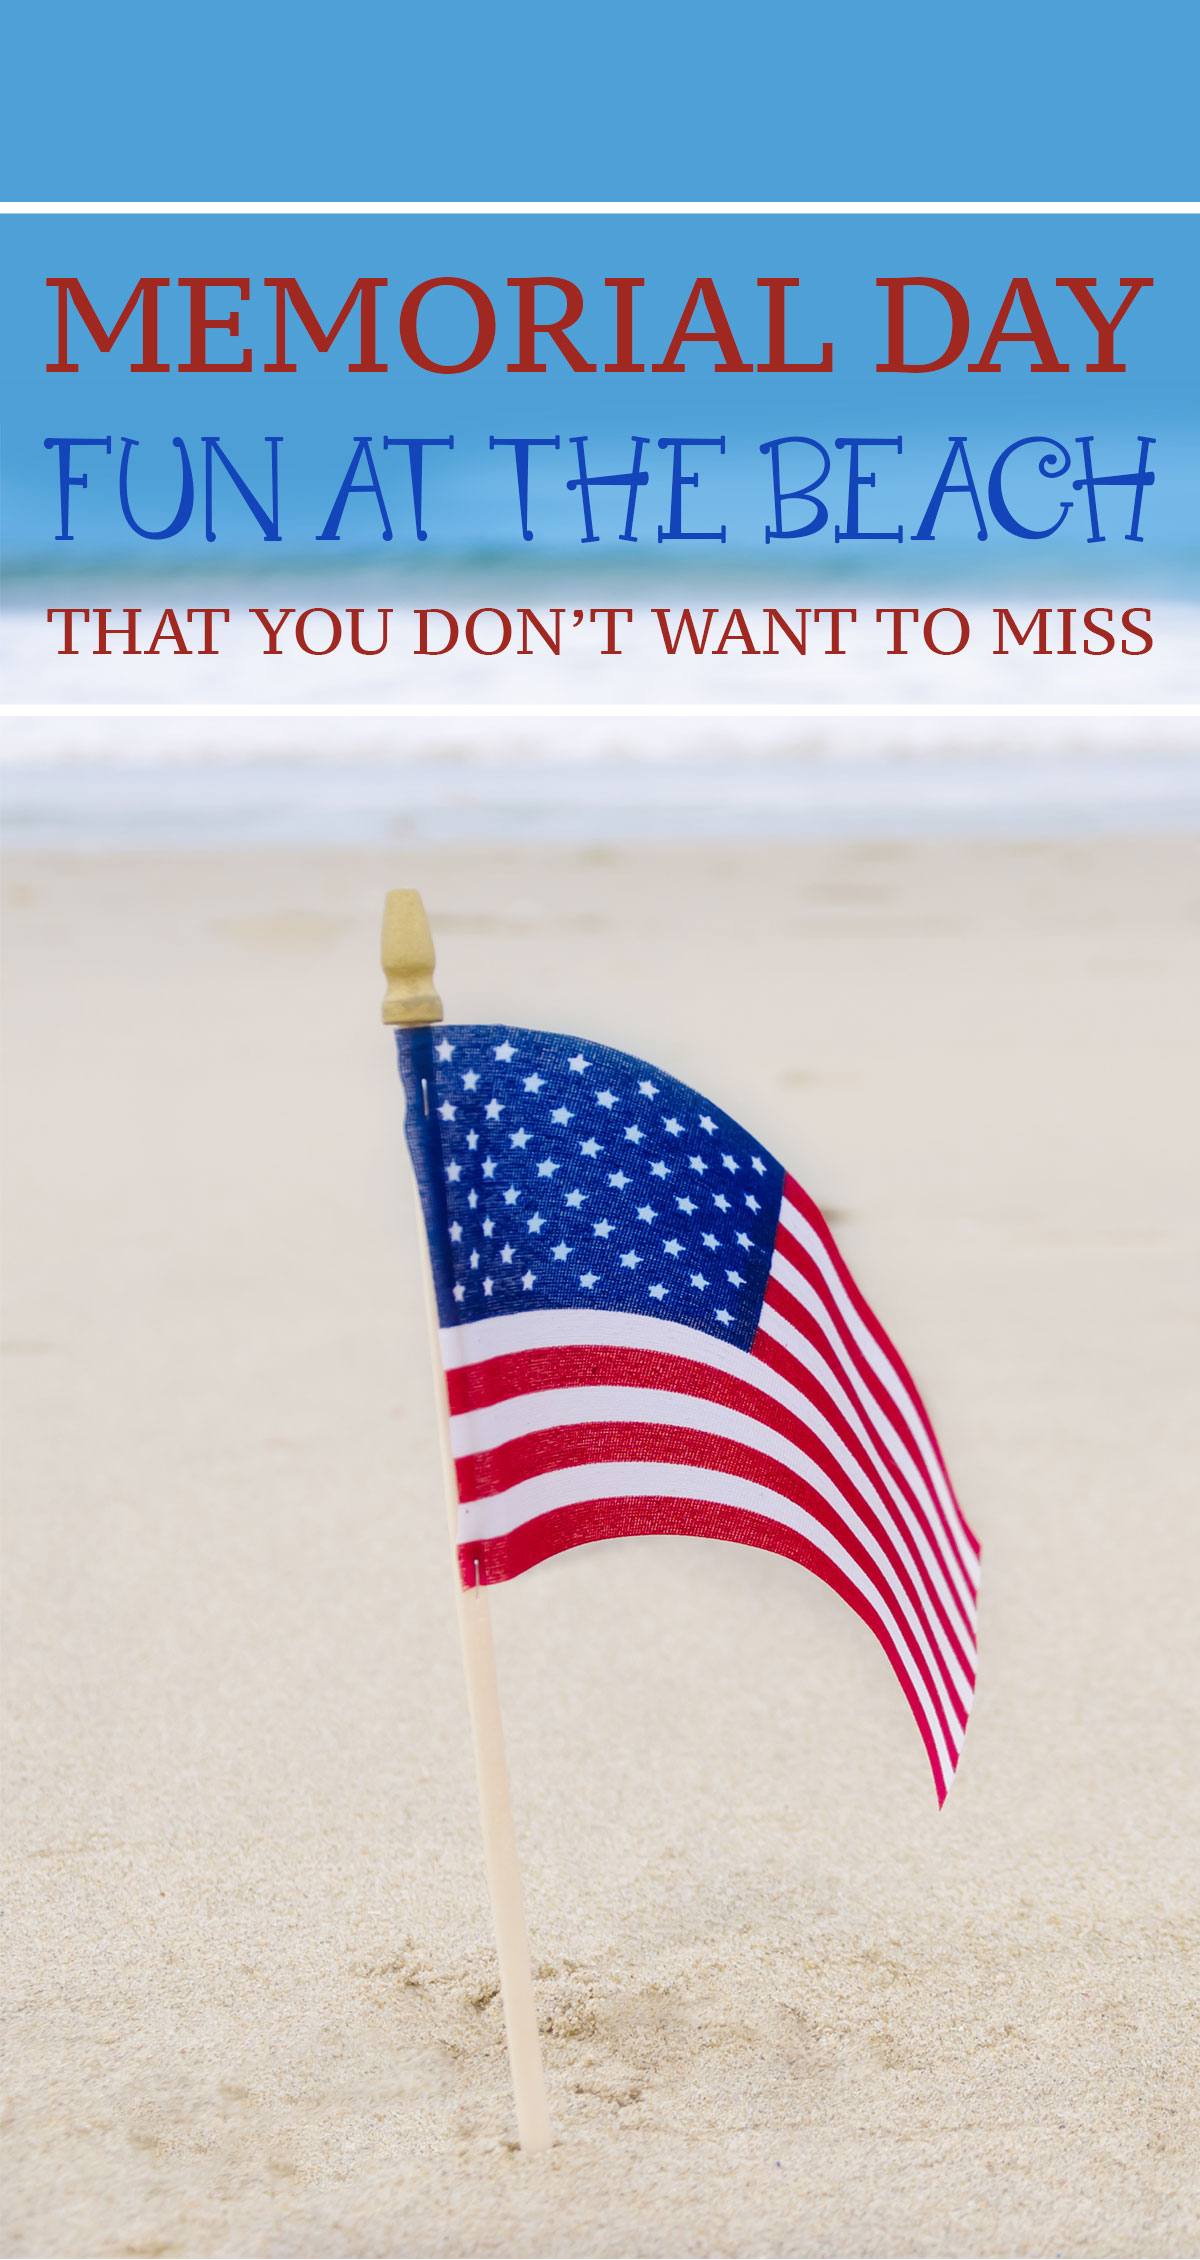 Memorial Day Fun at the Beach That You Don't Want to Miss Pin